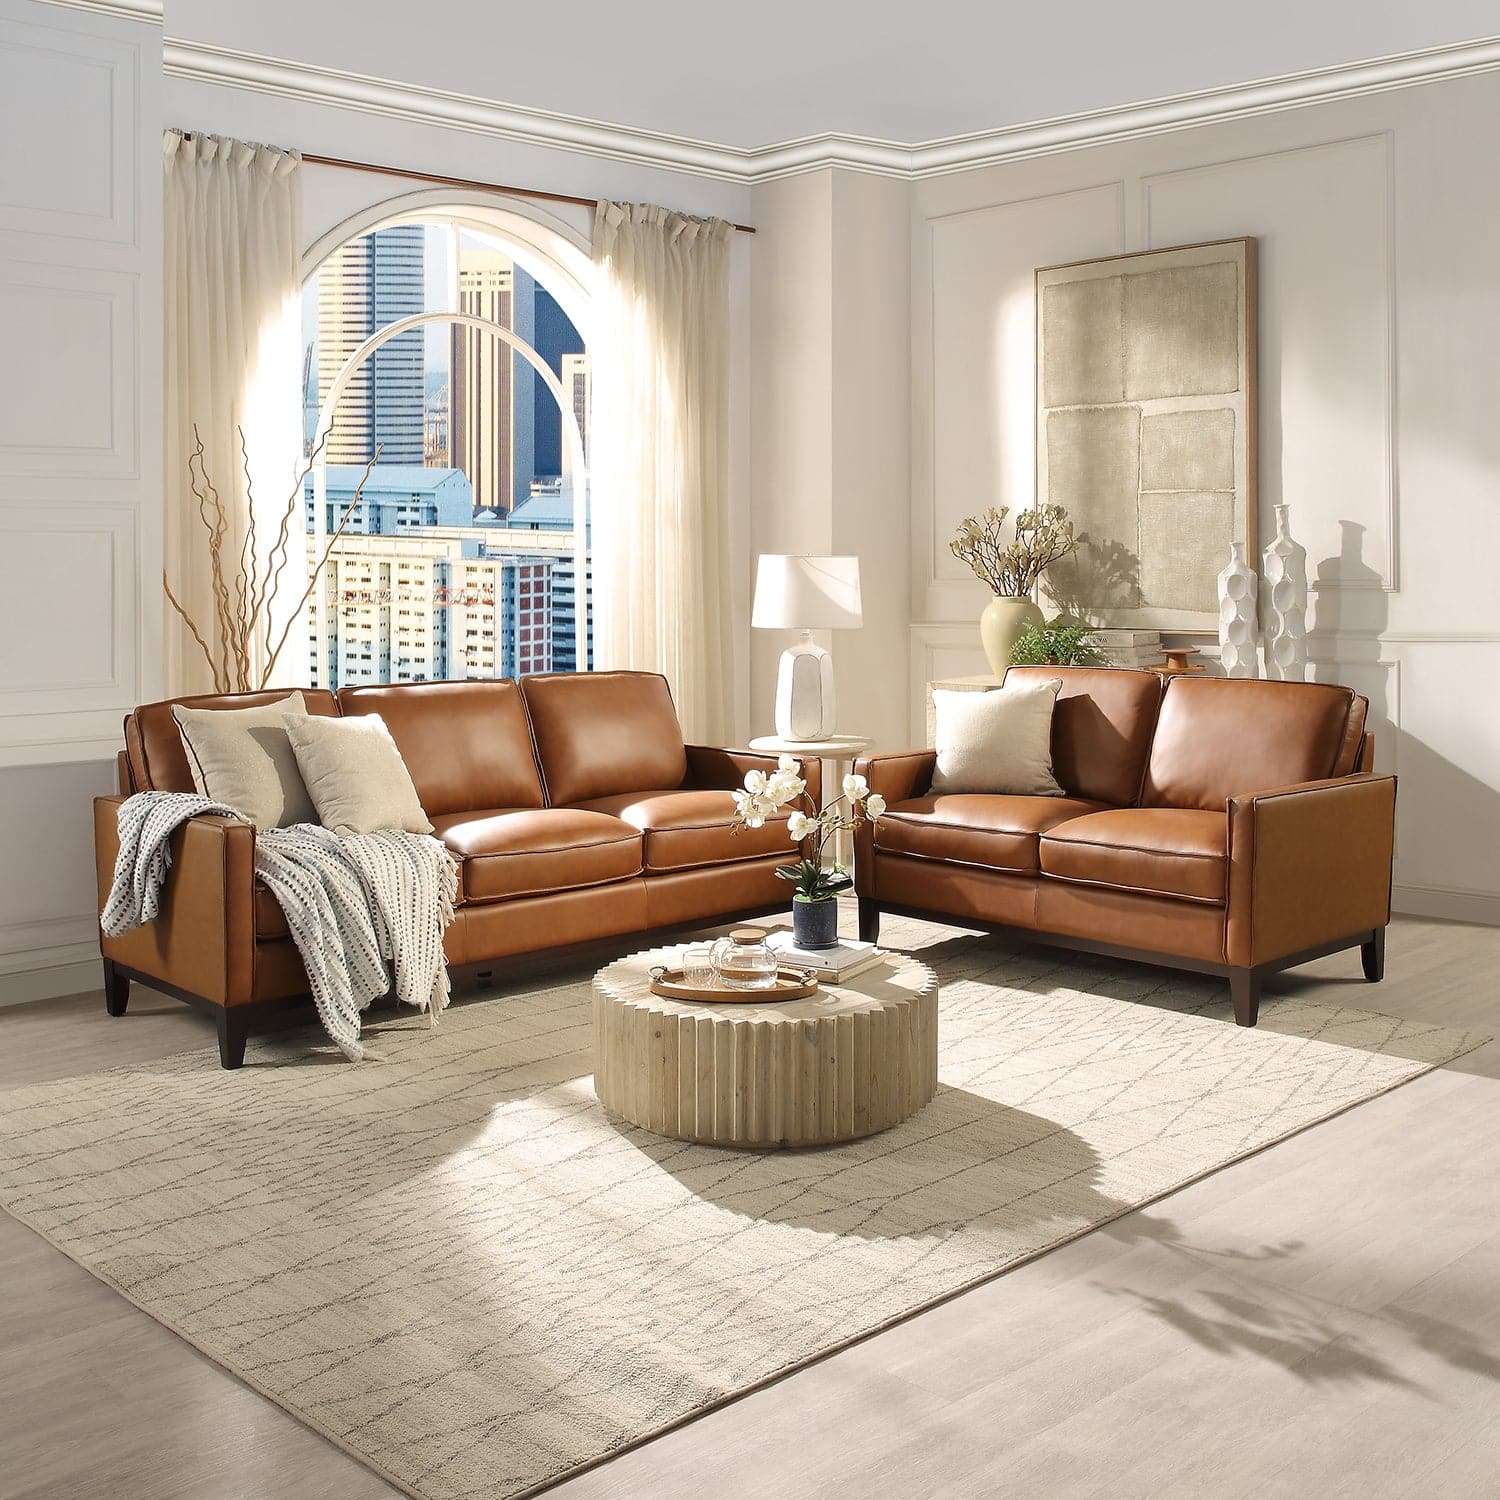 Pimlico Camel Brown Top Grain Leather 3-Seater Sofa with Ottoman